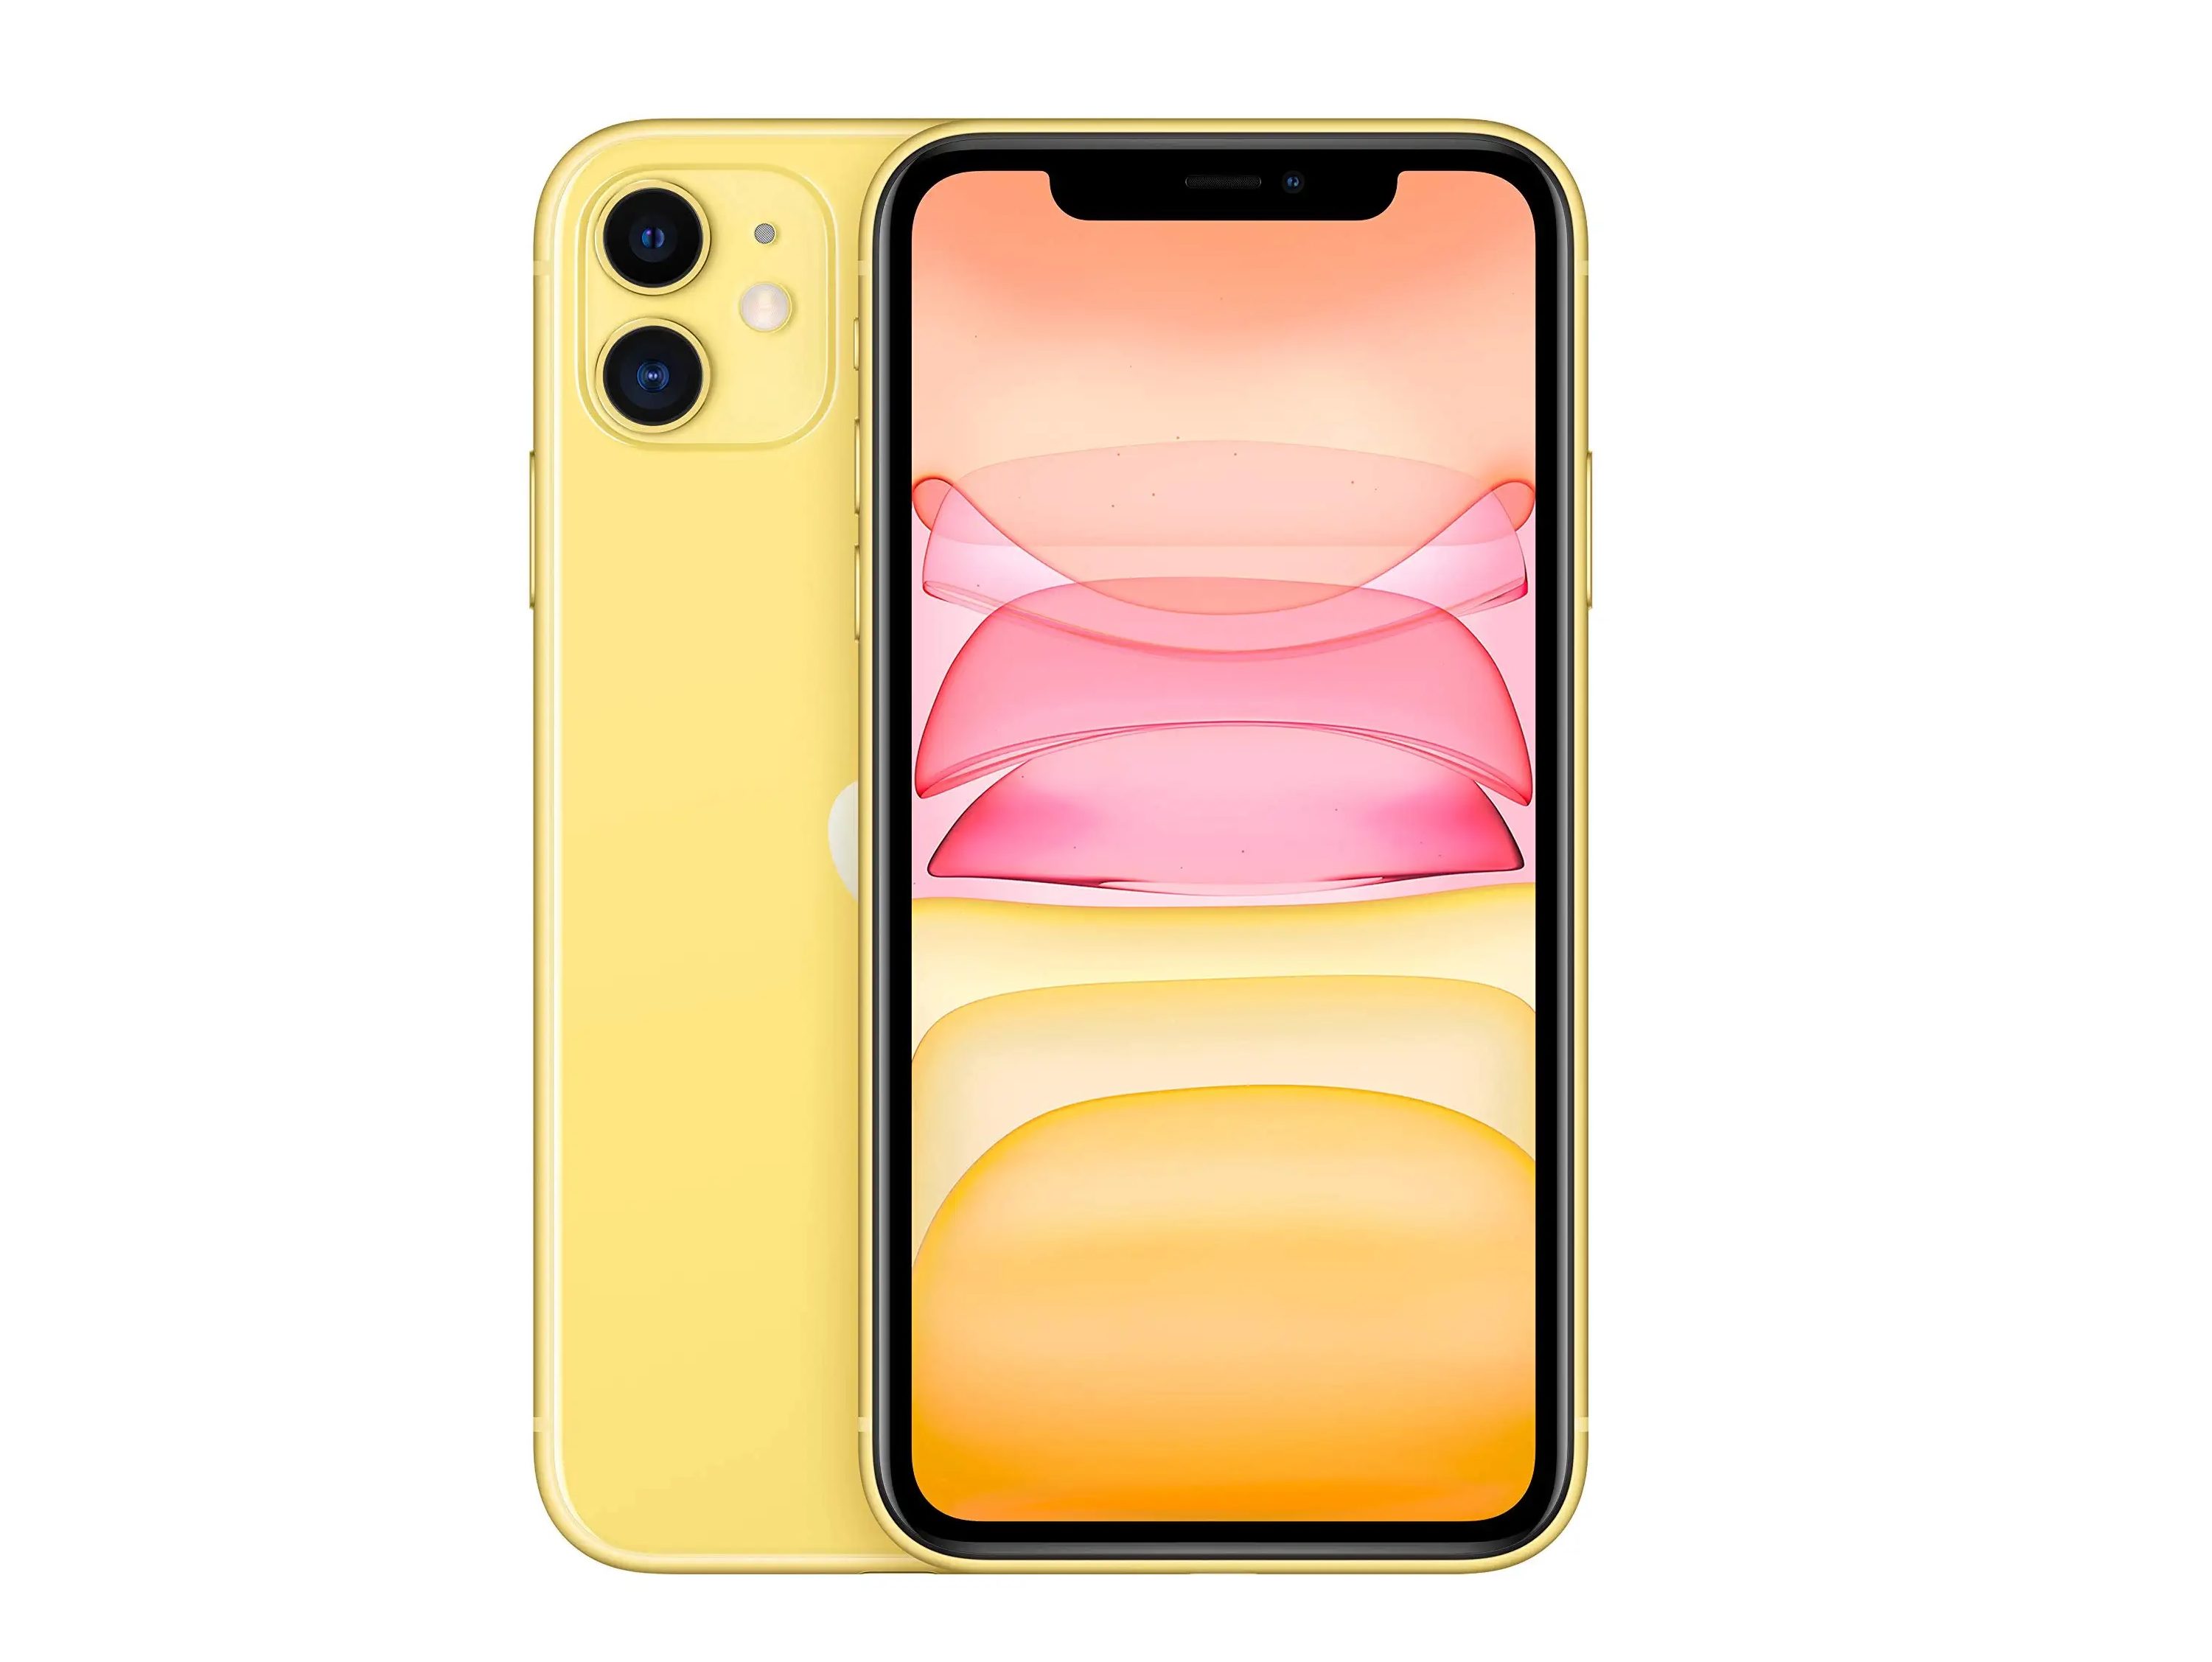 The iPhone 11, yellow edition.